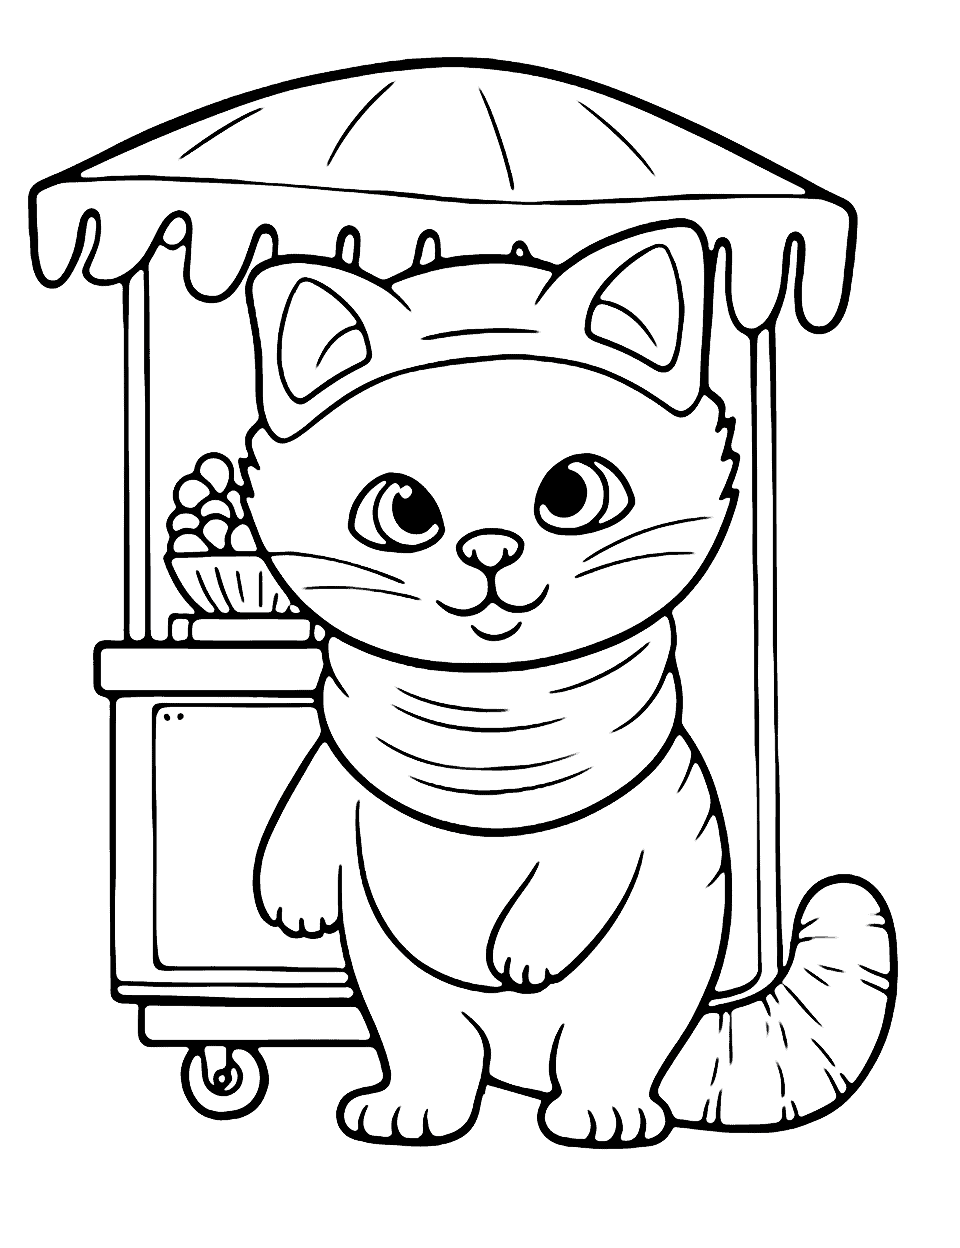 Ice Cream Vendor Cat Coloring Page - A cool cat selling various kinds of ice cream from a small stand.